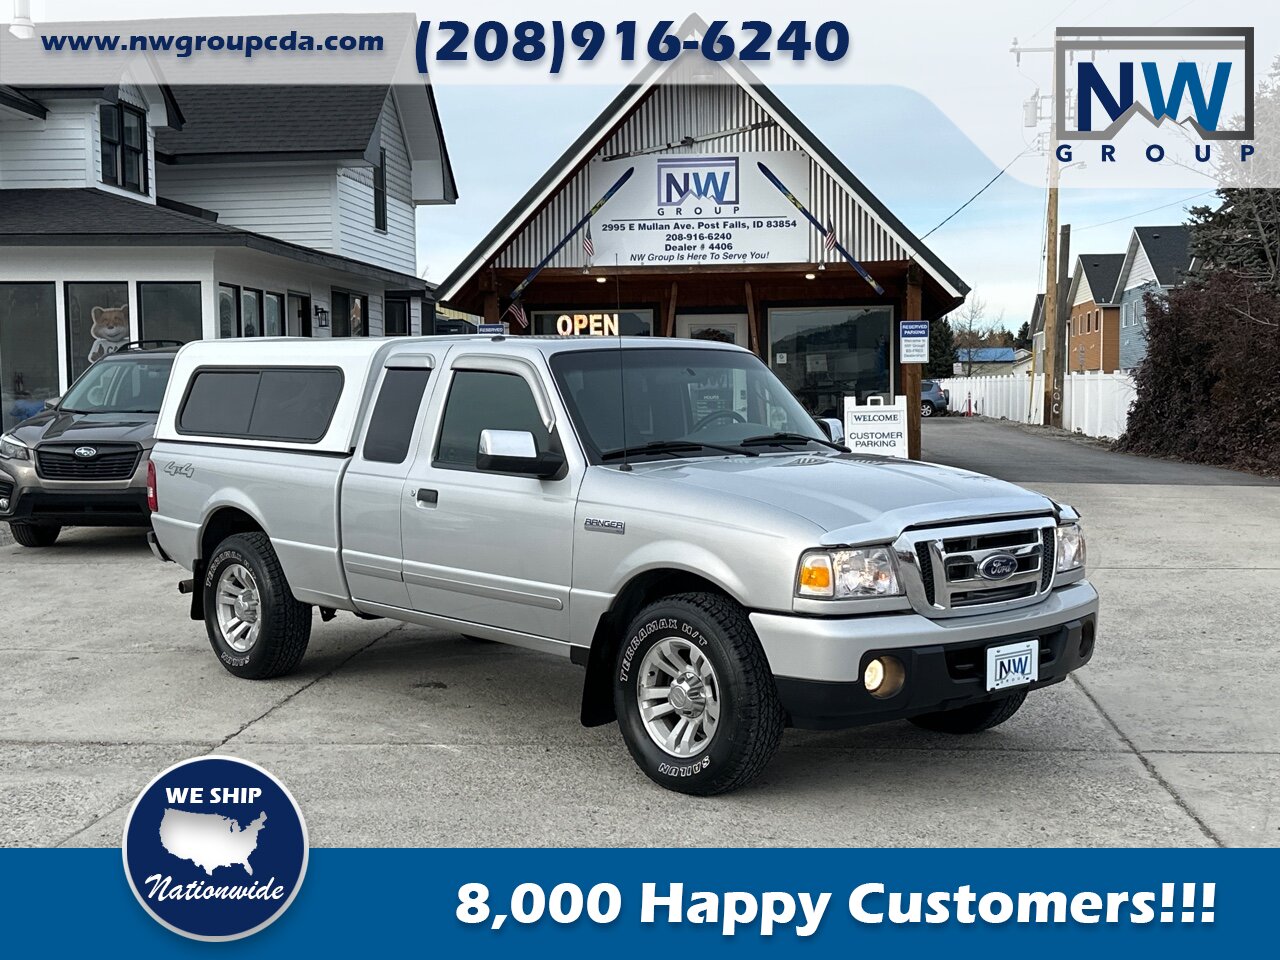 2008 Ford Ranger XLT. 4X4.  ONLY 70K MILES. 4 DOOR EXTENDED CAB PICKUP 4.0L V6 F SOHC GASOLINE REAR WHEEL DRIVE W/ 4X4 - Photo 1 - Post Falls, ID 83854